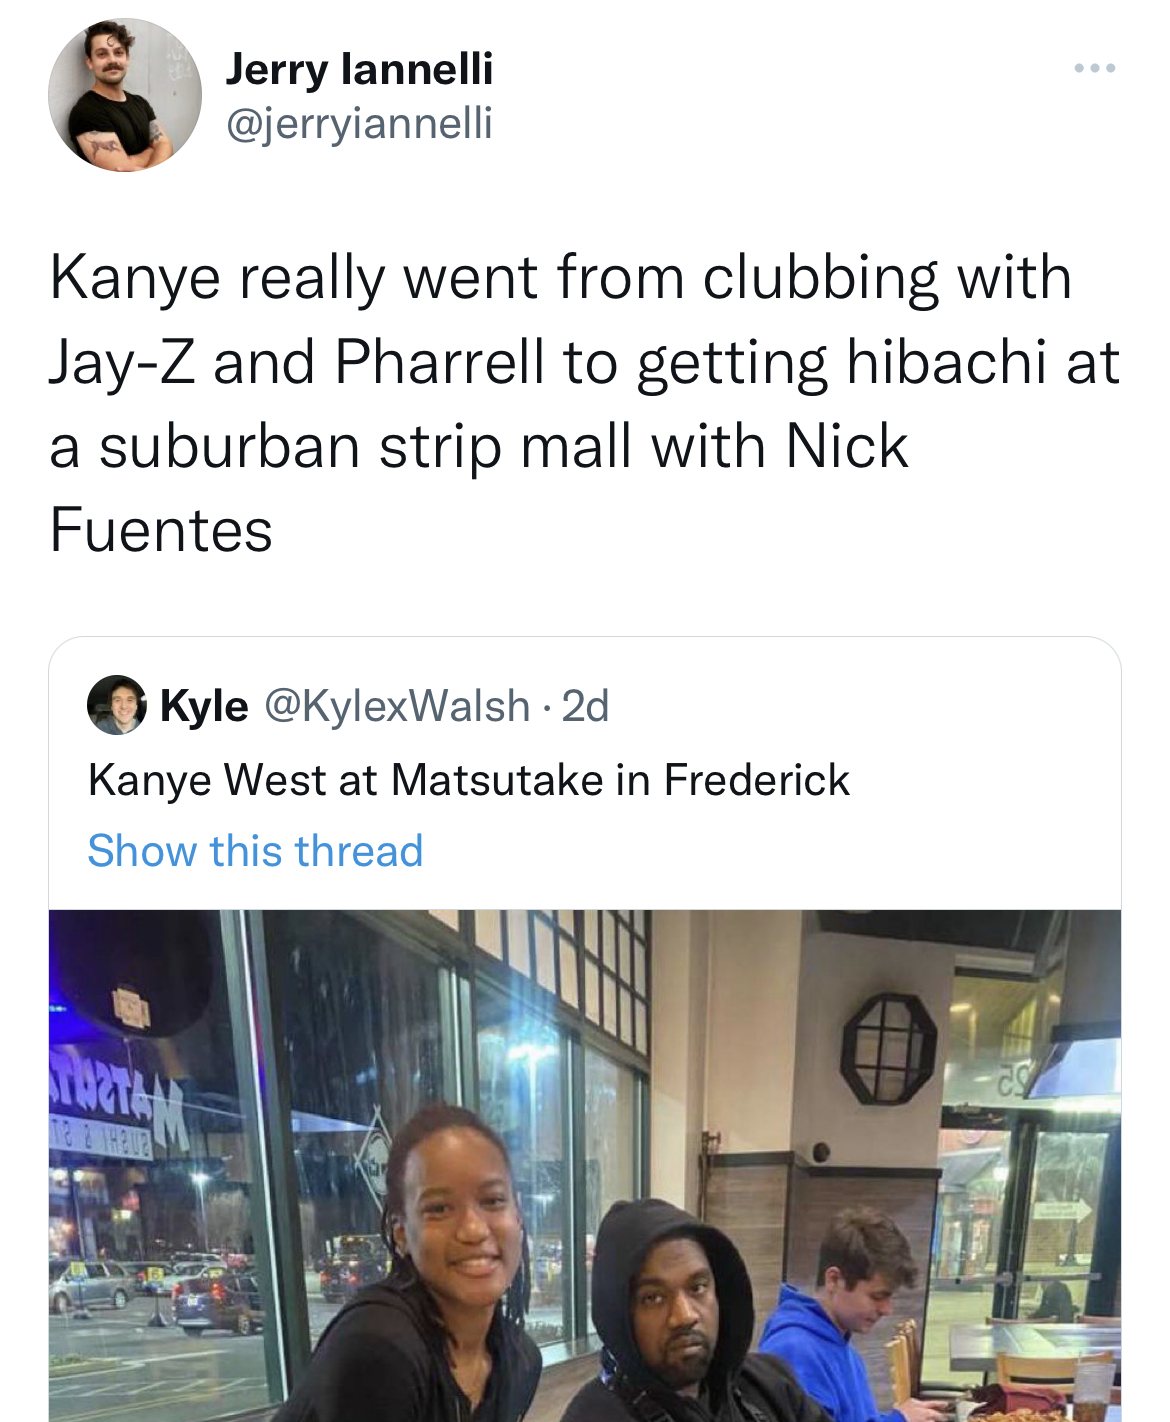 tweets roasting celebs - media - Jerry lannelli Kanye really went from clubbing with JayZ and Pharrell to getting hibachi at a suburban strip mall with Nick Fuentes Kyle . 2d Kanye West at Matsutake in Frederick Show this thread Uzta